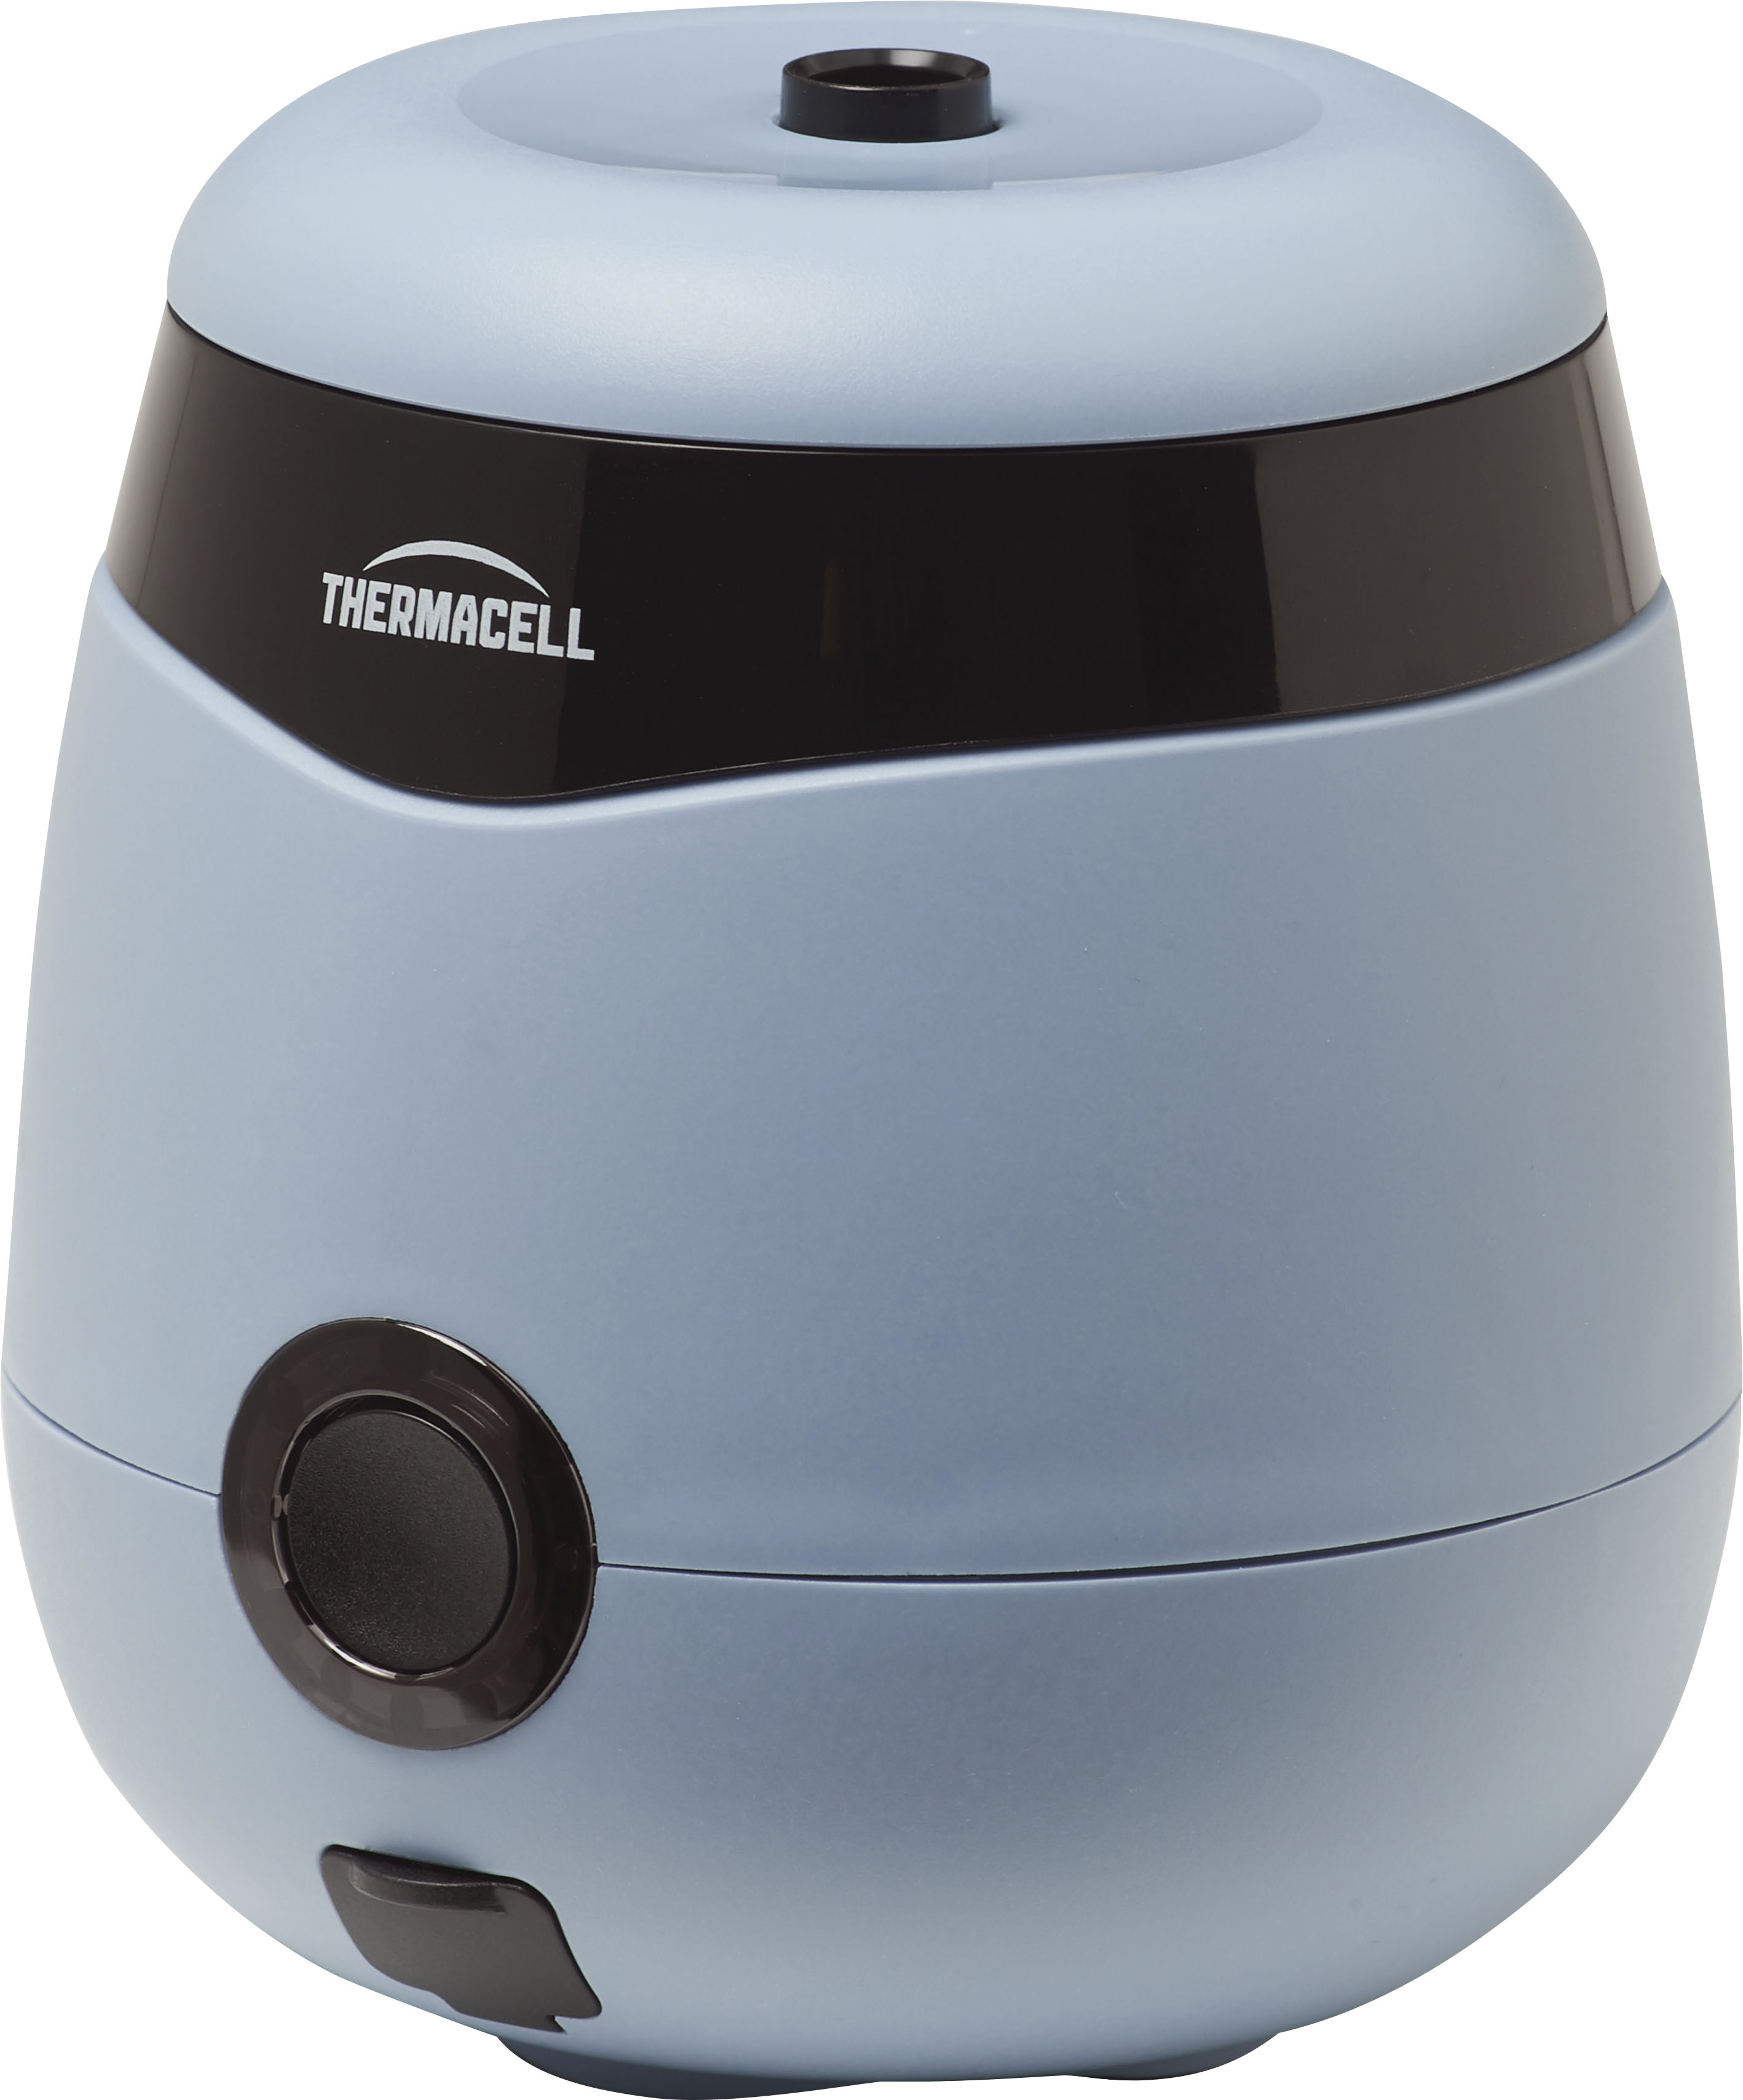 Angle View: Thermacell - Mosquito Repellent Refill